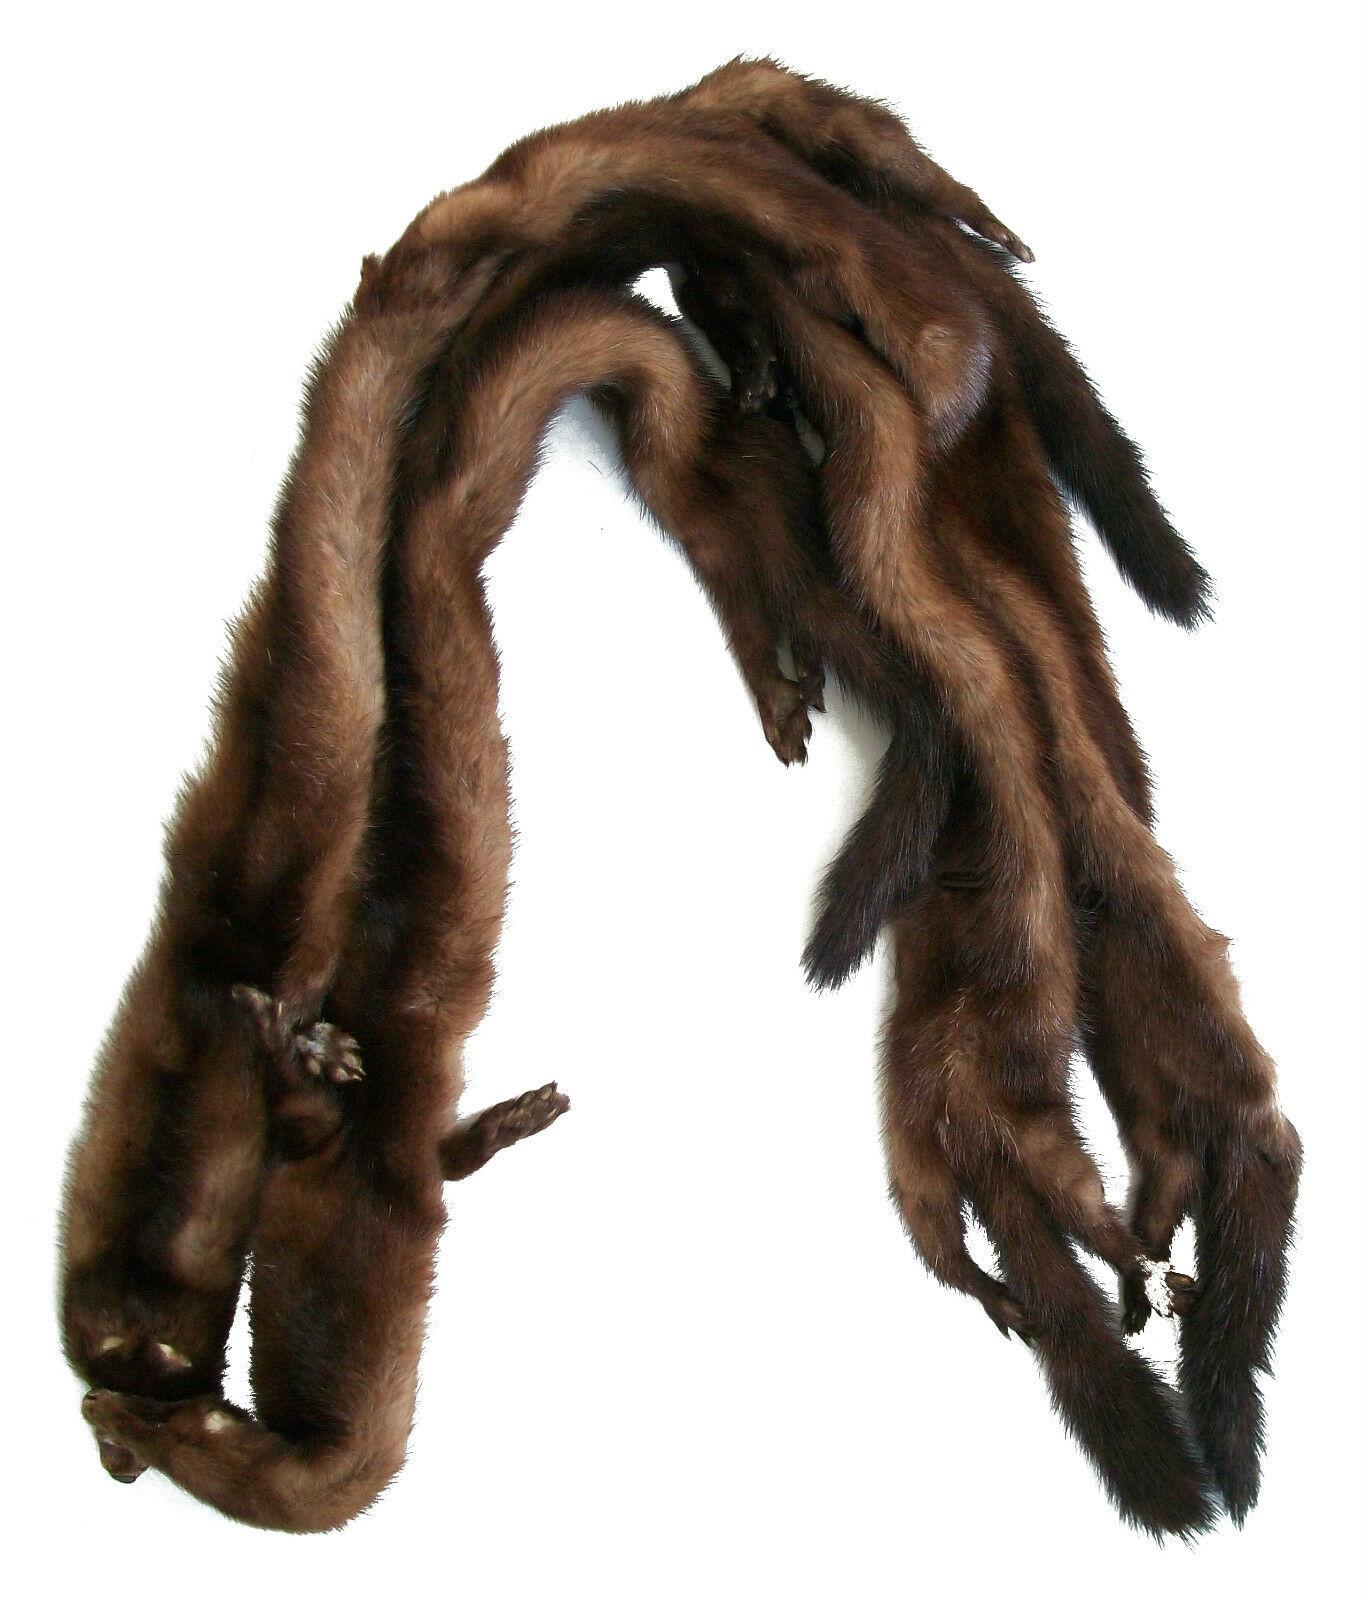 Hand-Crafted Vintage Mahogany Mink Scarf - Full Body Pelts - Clips & Buttons - Circa 1940's For Sale